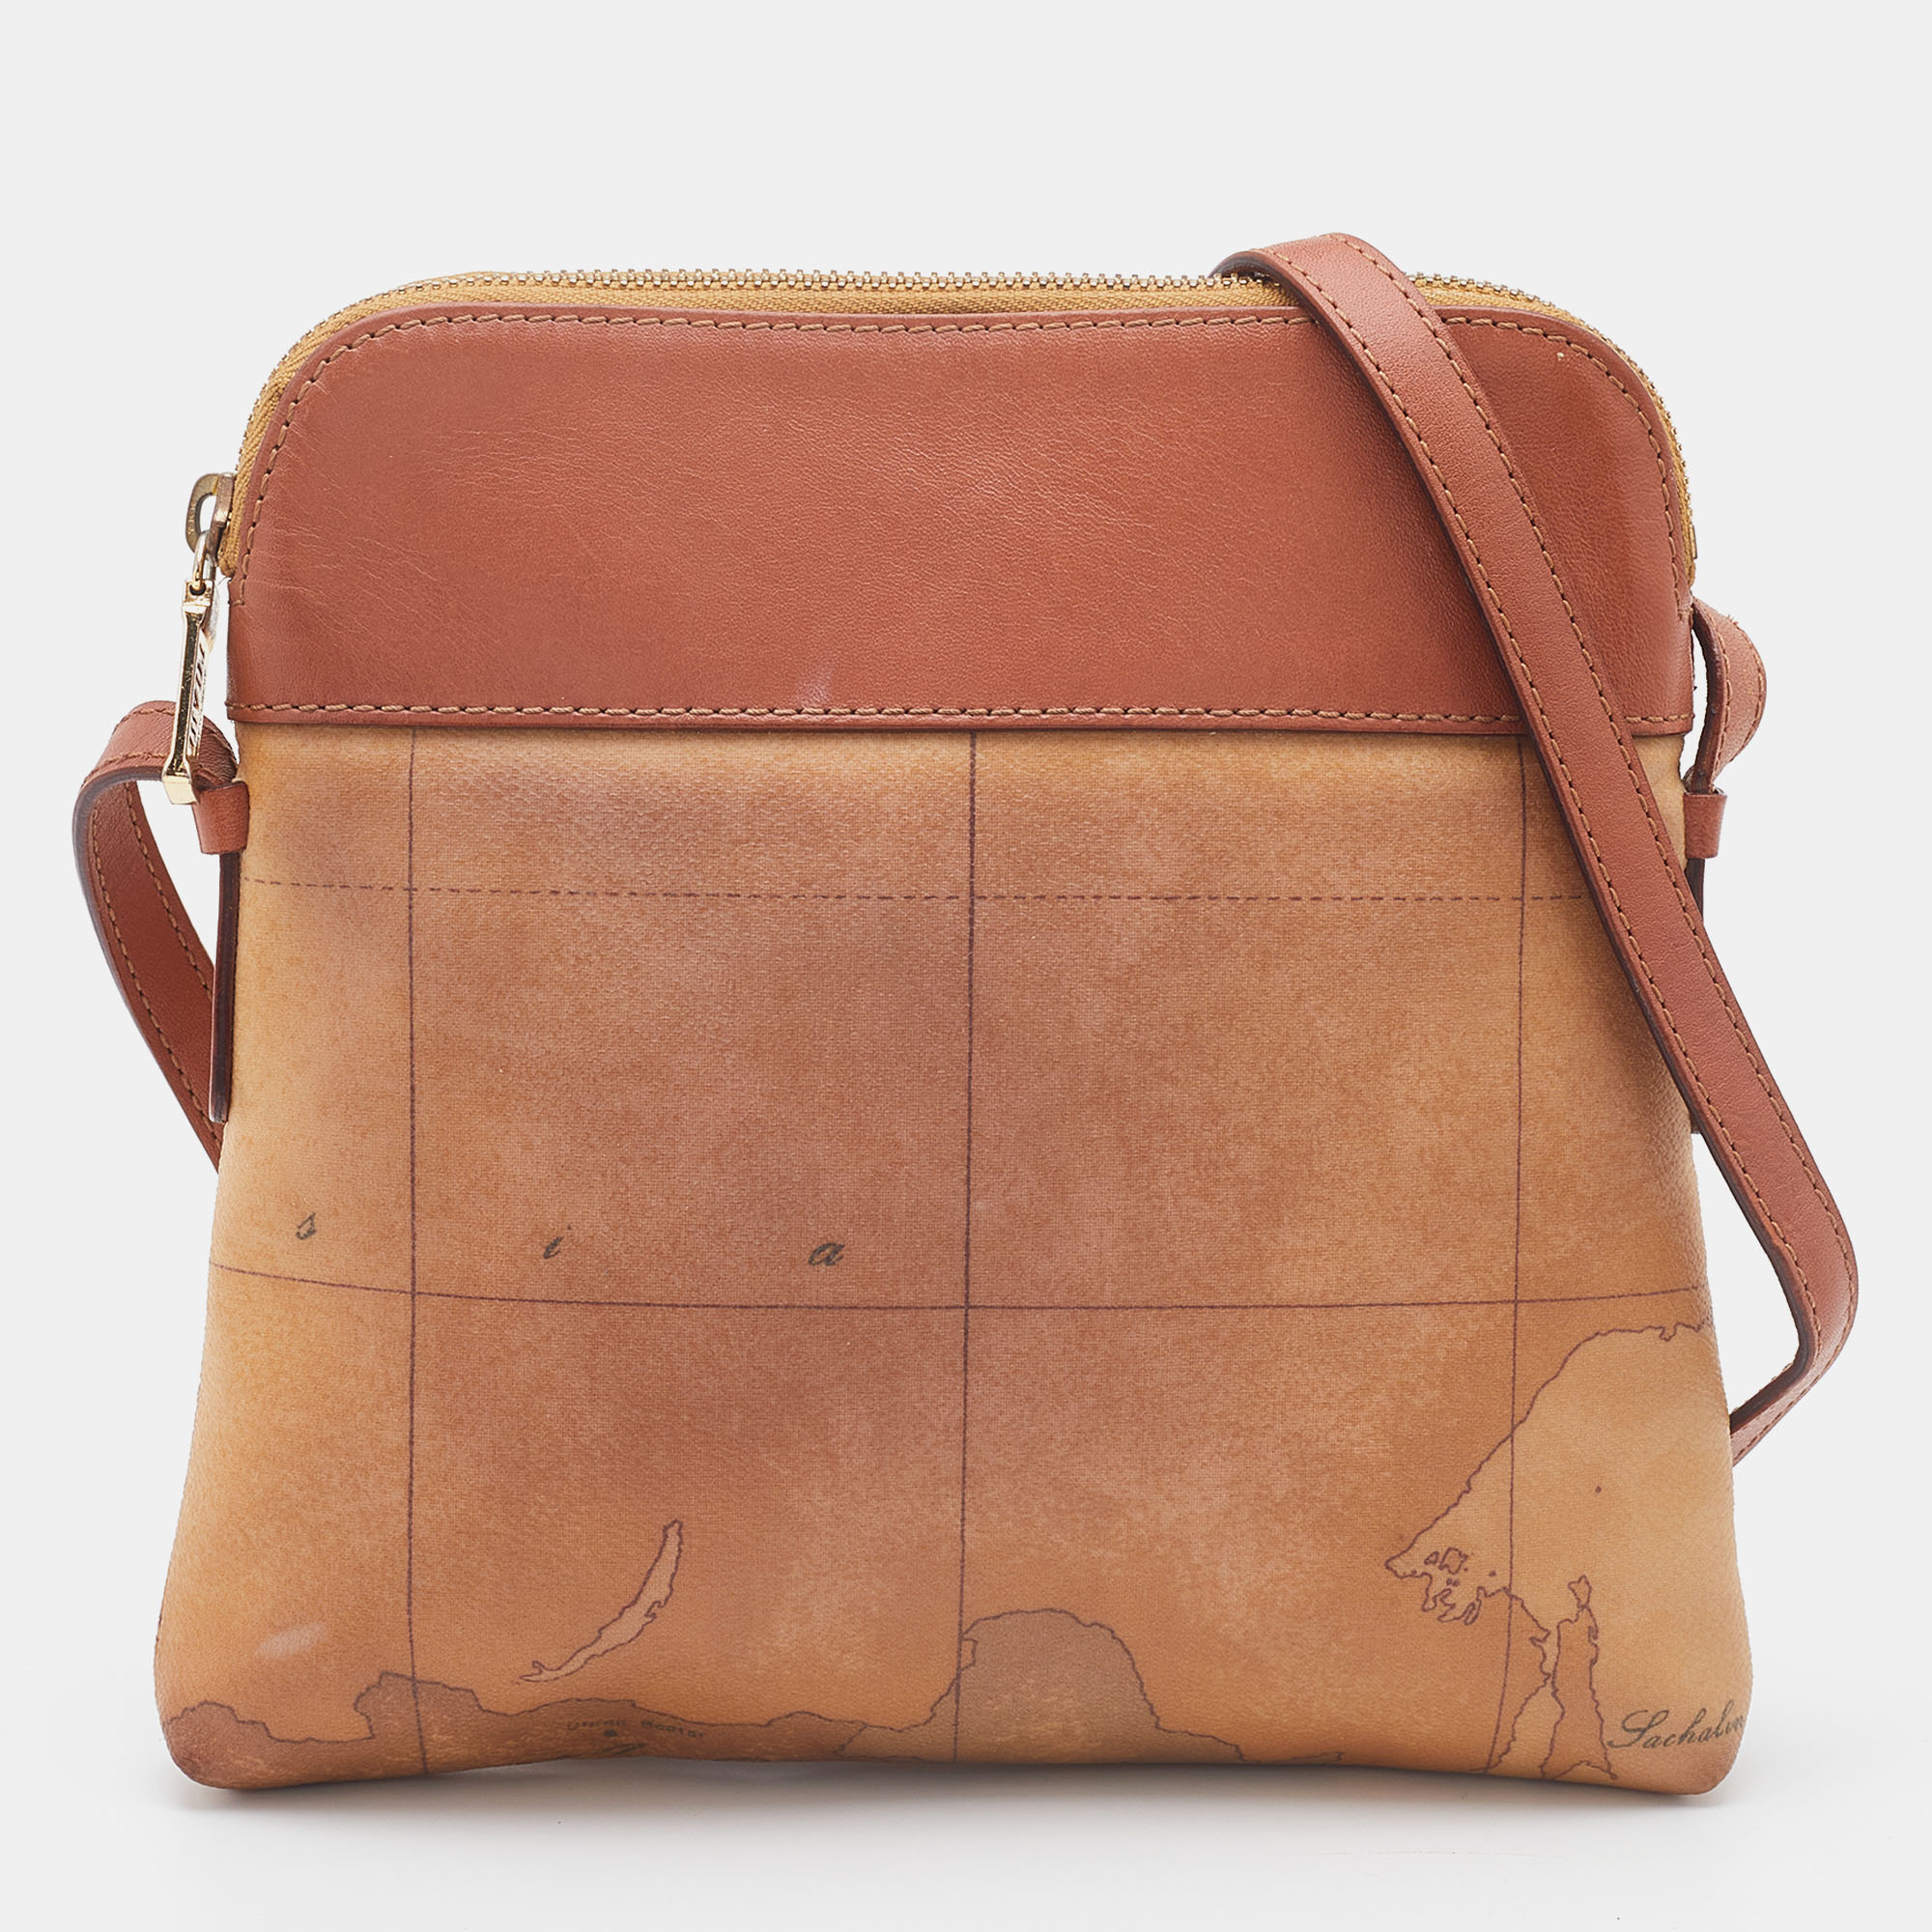 Alviero Martini 1A Classe Coated Canvas And Leather Zip Crossbody Bag